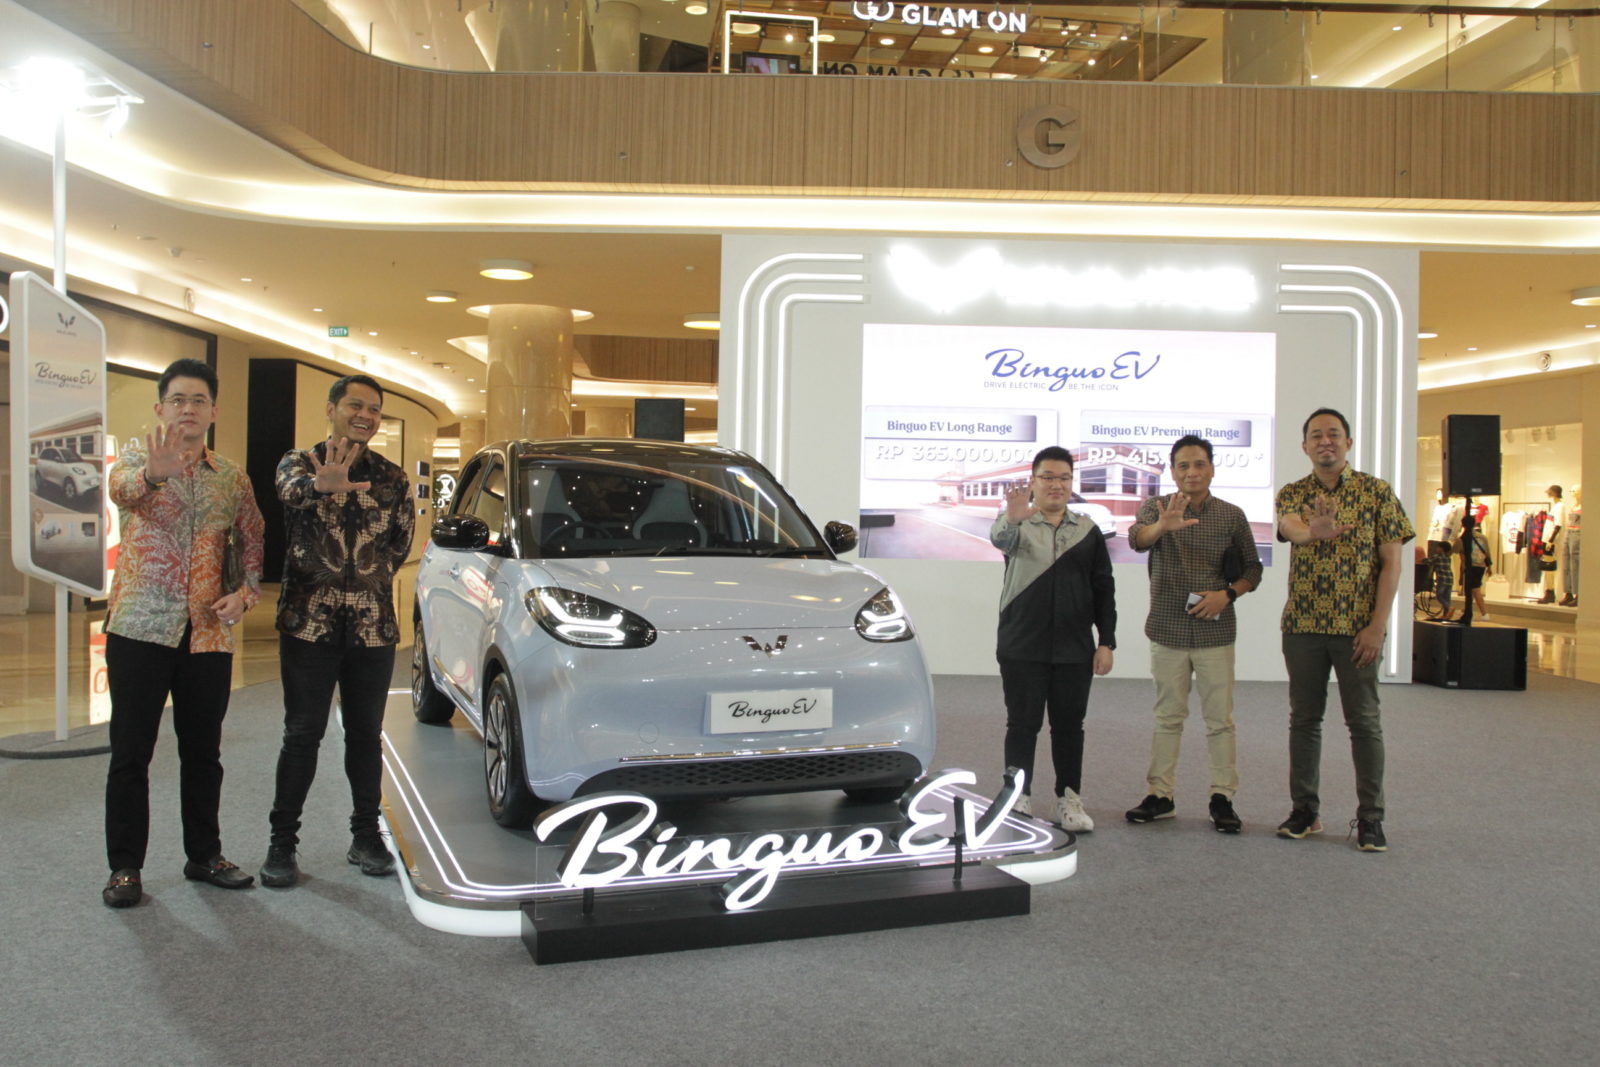 Image BinguoEV, Wuling’s Second Electric Car is Officially Marketed in the City of Surabaya